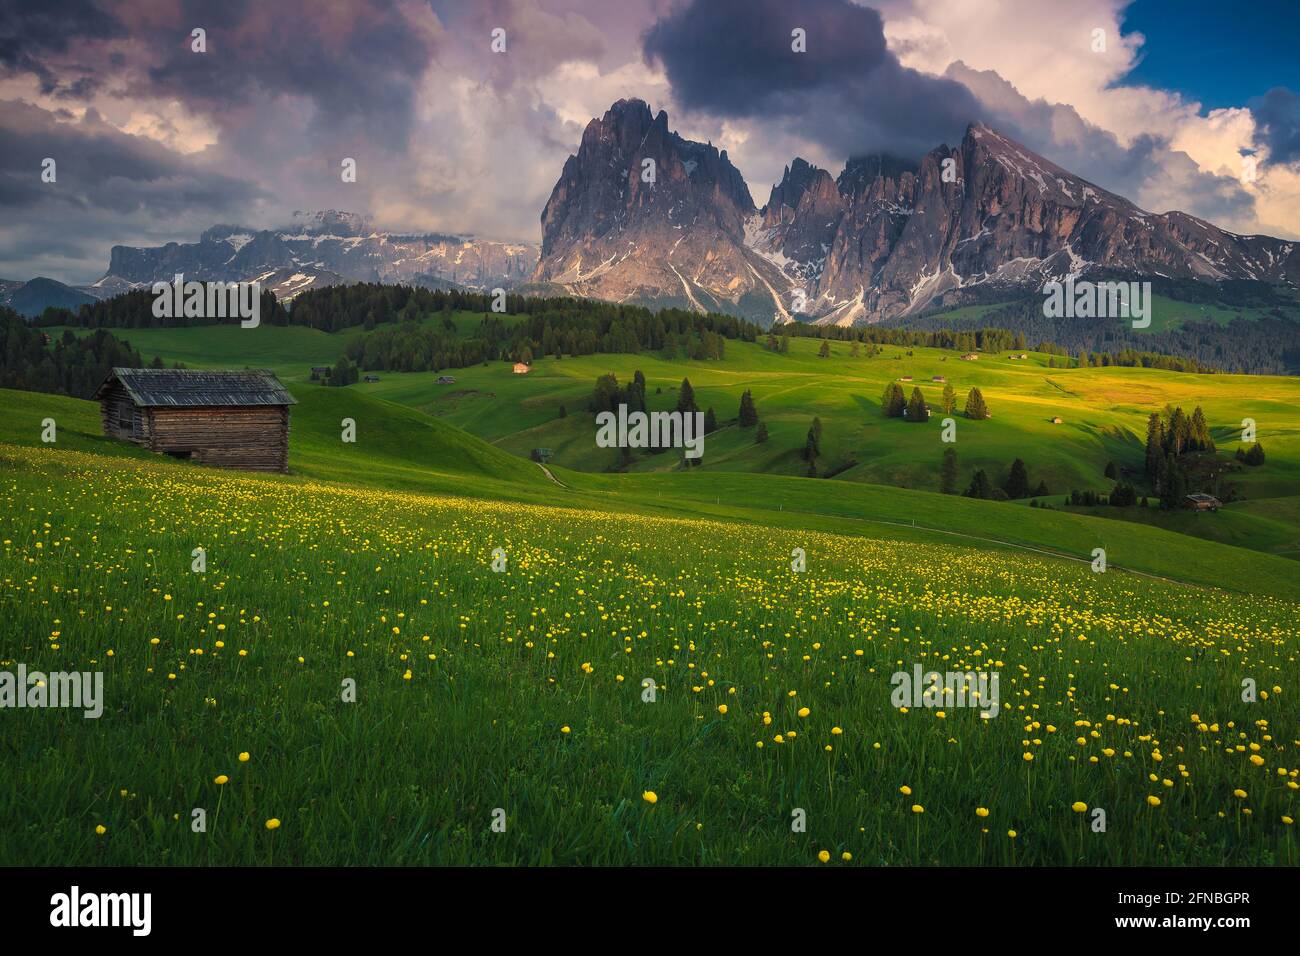 Breathtaking summer landscape with yellow globeflowers (trollius) on the green slopes and snowy mountains in background, Alpe di Siusi, Dolomites, Ita Stock Photo